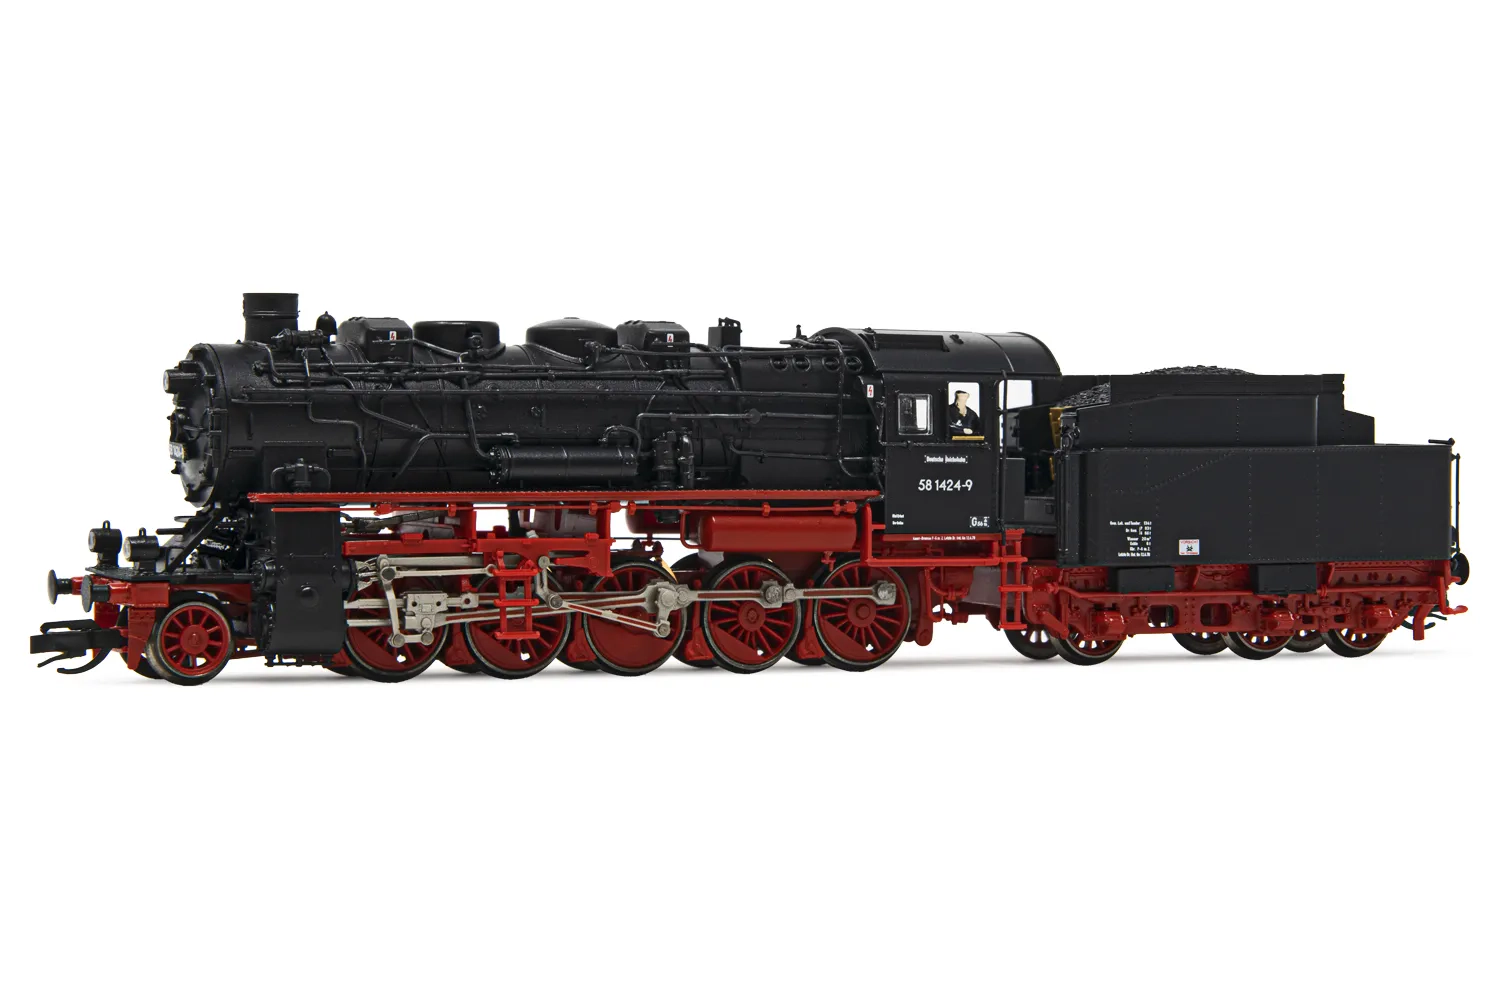 DR, steam locomotive class 58 1424-9 with 4-dome boiler, black/red livery livery, period IV